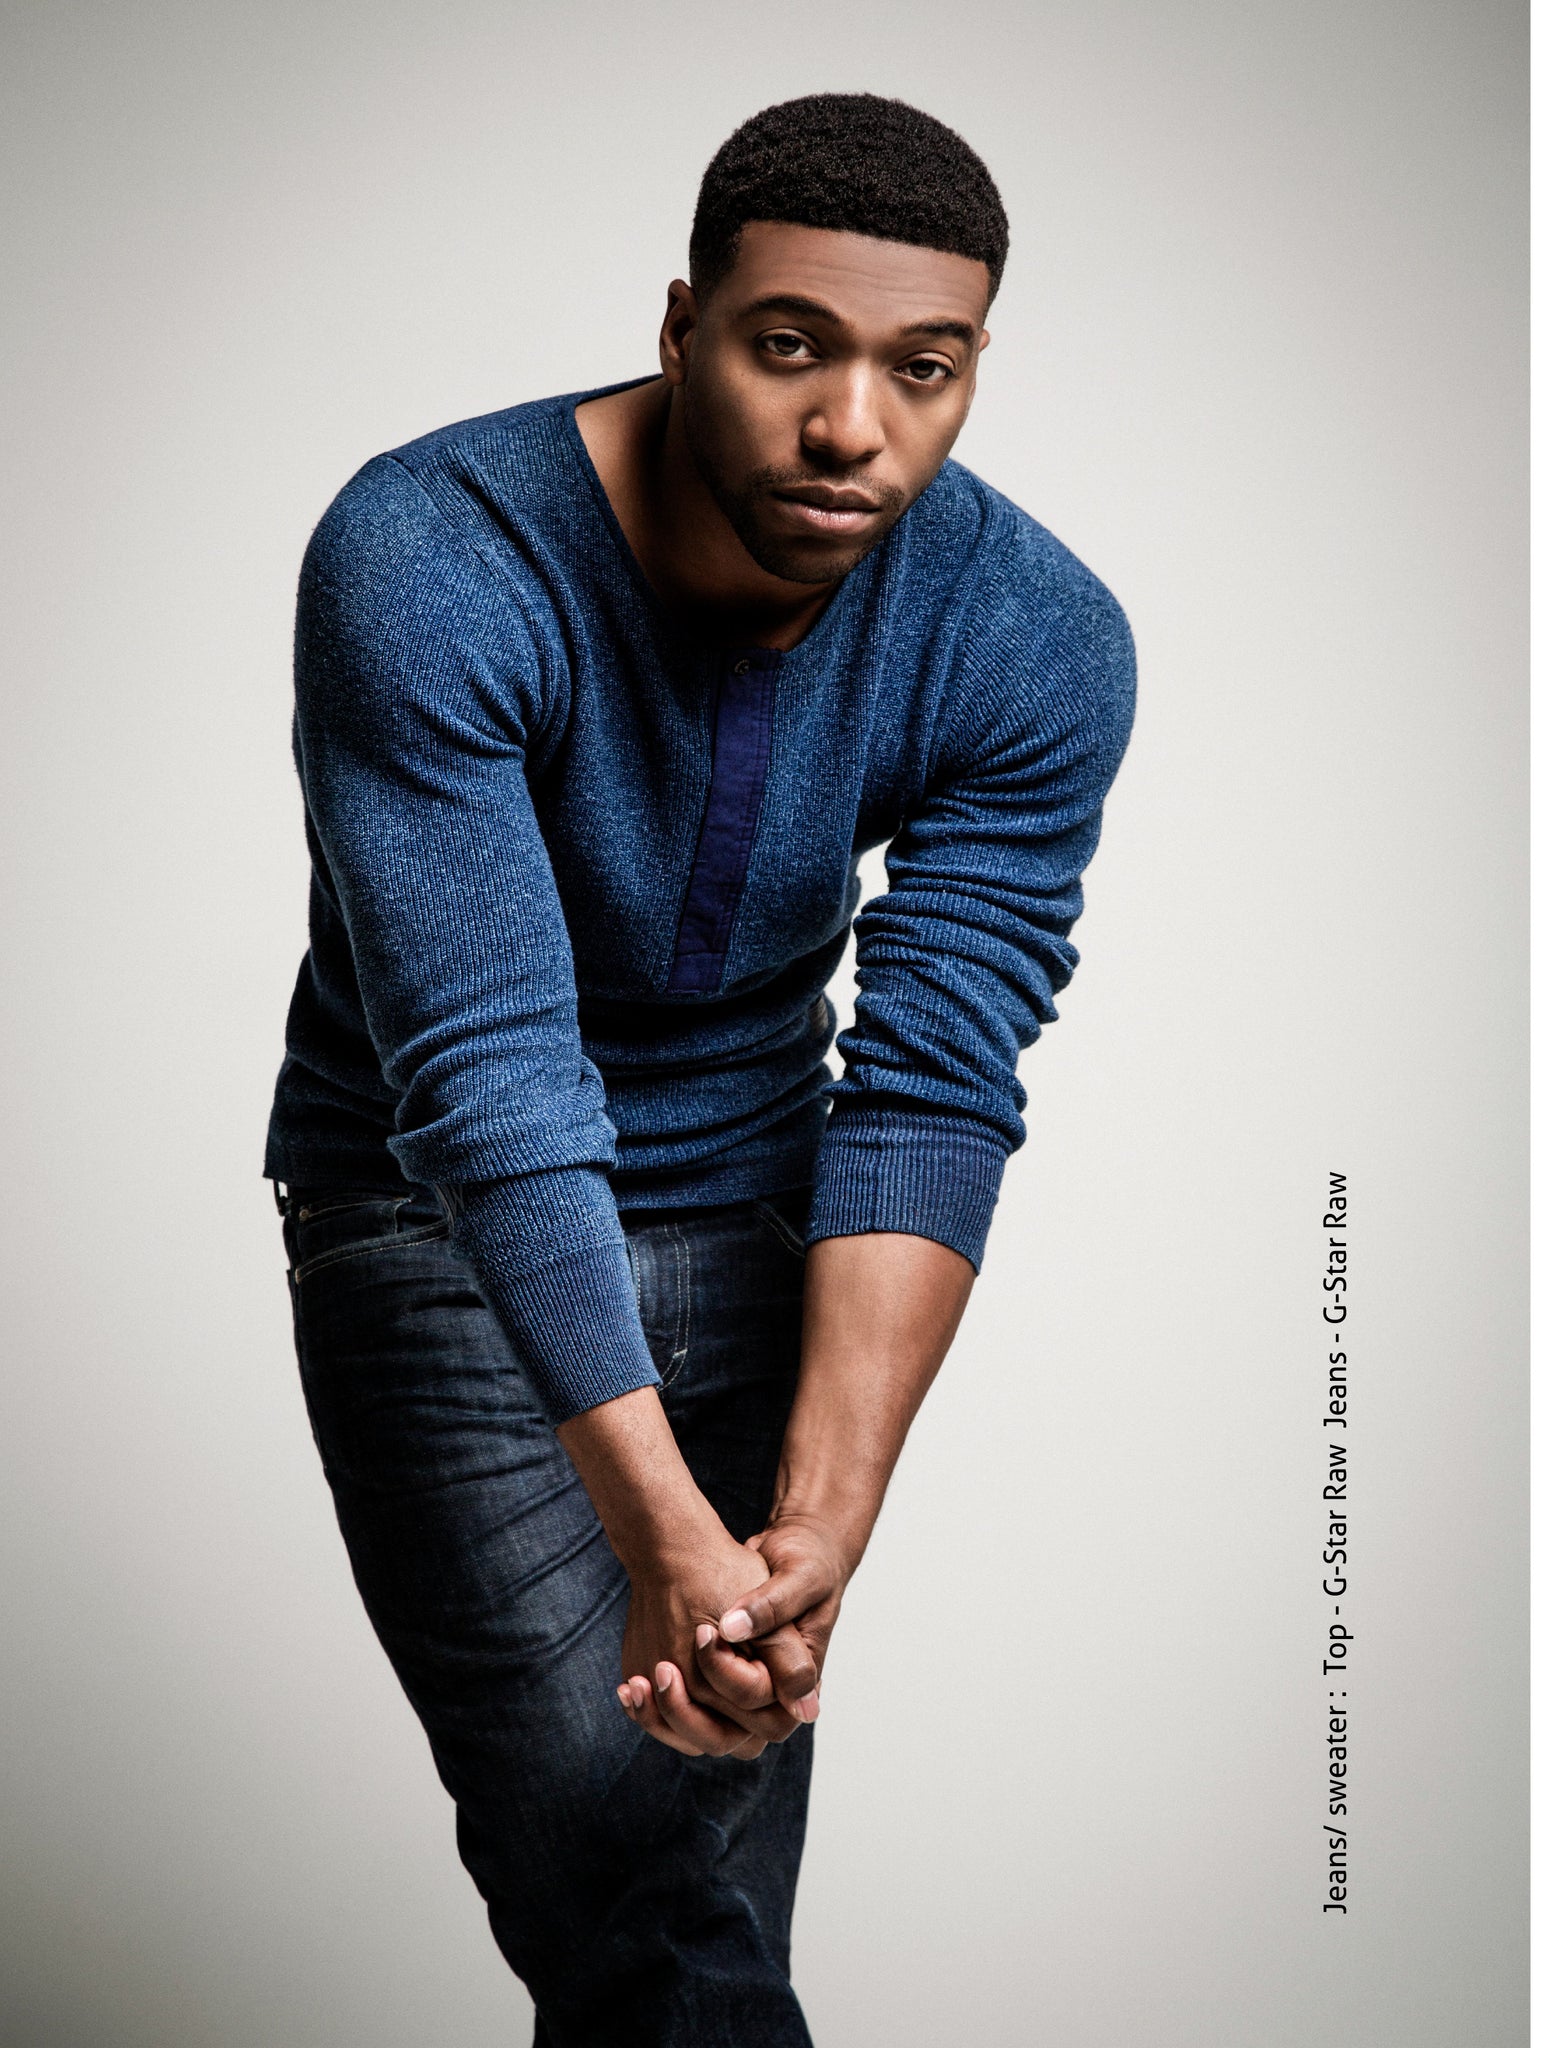 Actor Jocko Sims  of TNT'S LAST SHIP cover Ouch! Magazine_3